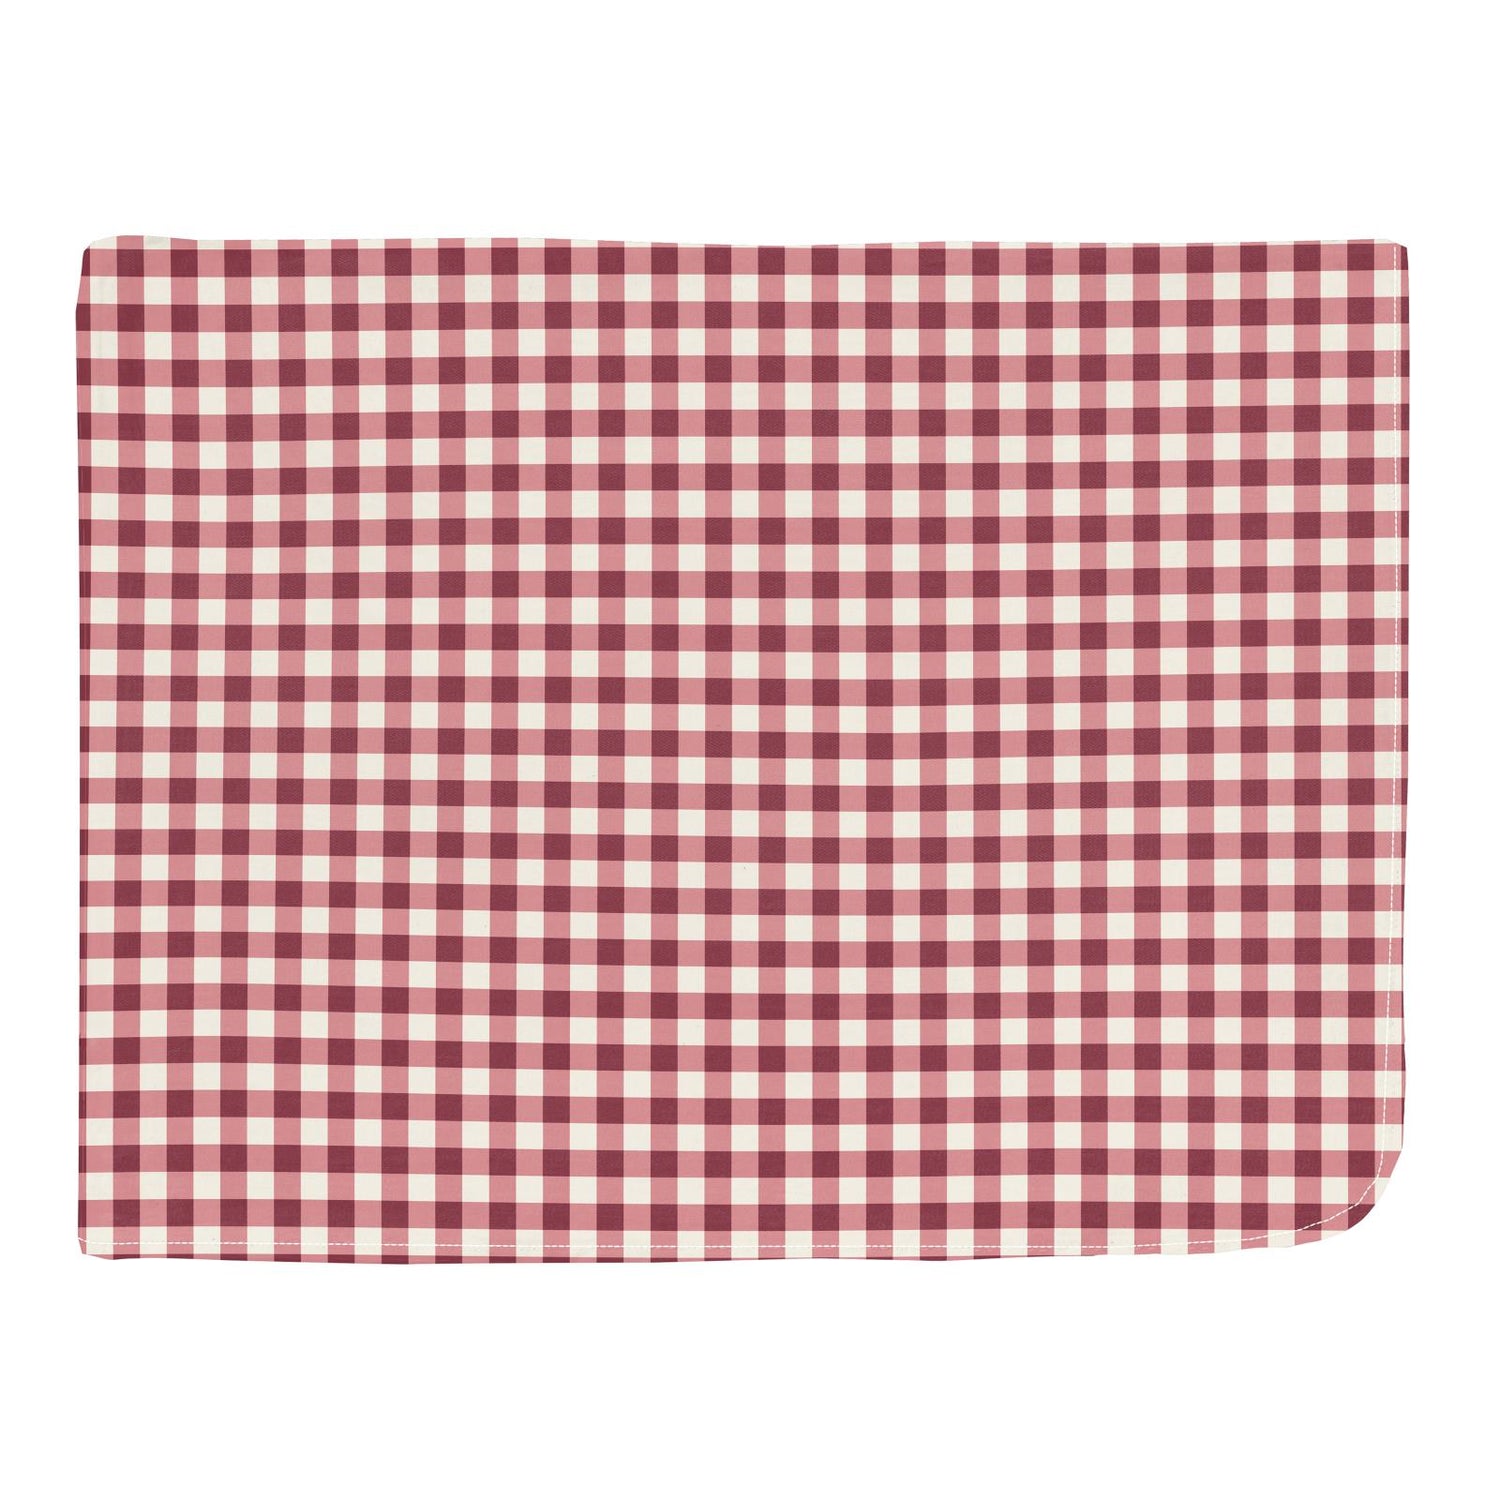 Print Single Layer Woven Throw Blanket in Wild Strawberry Gingham